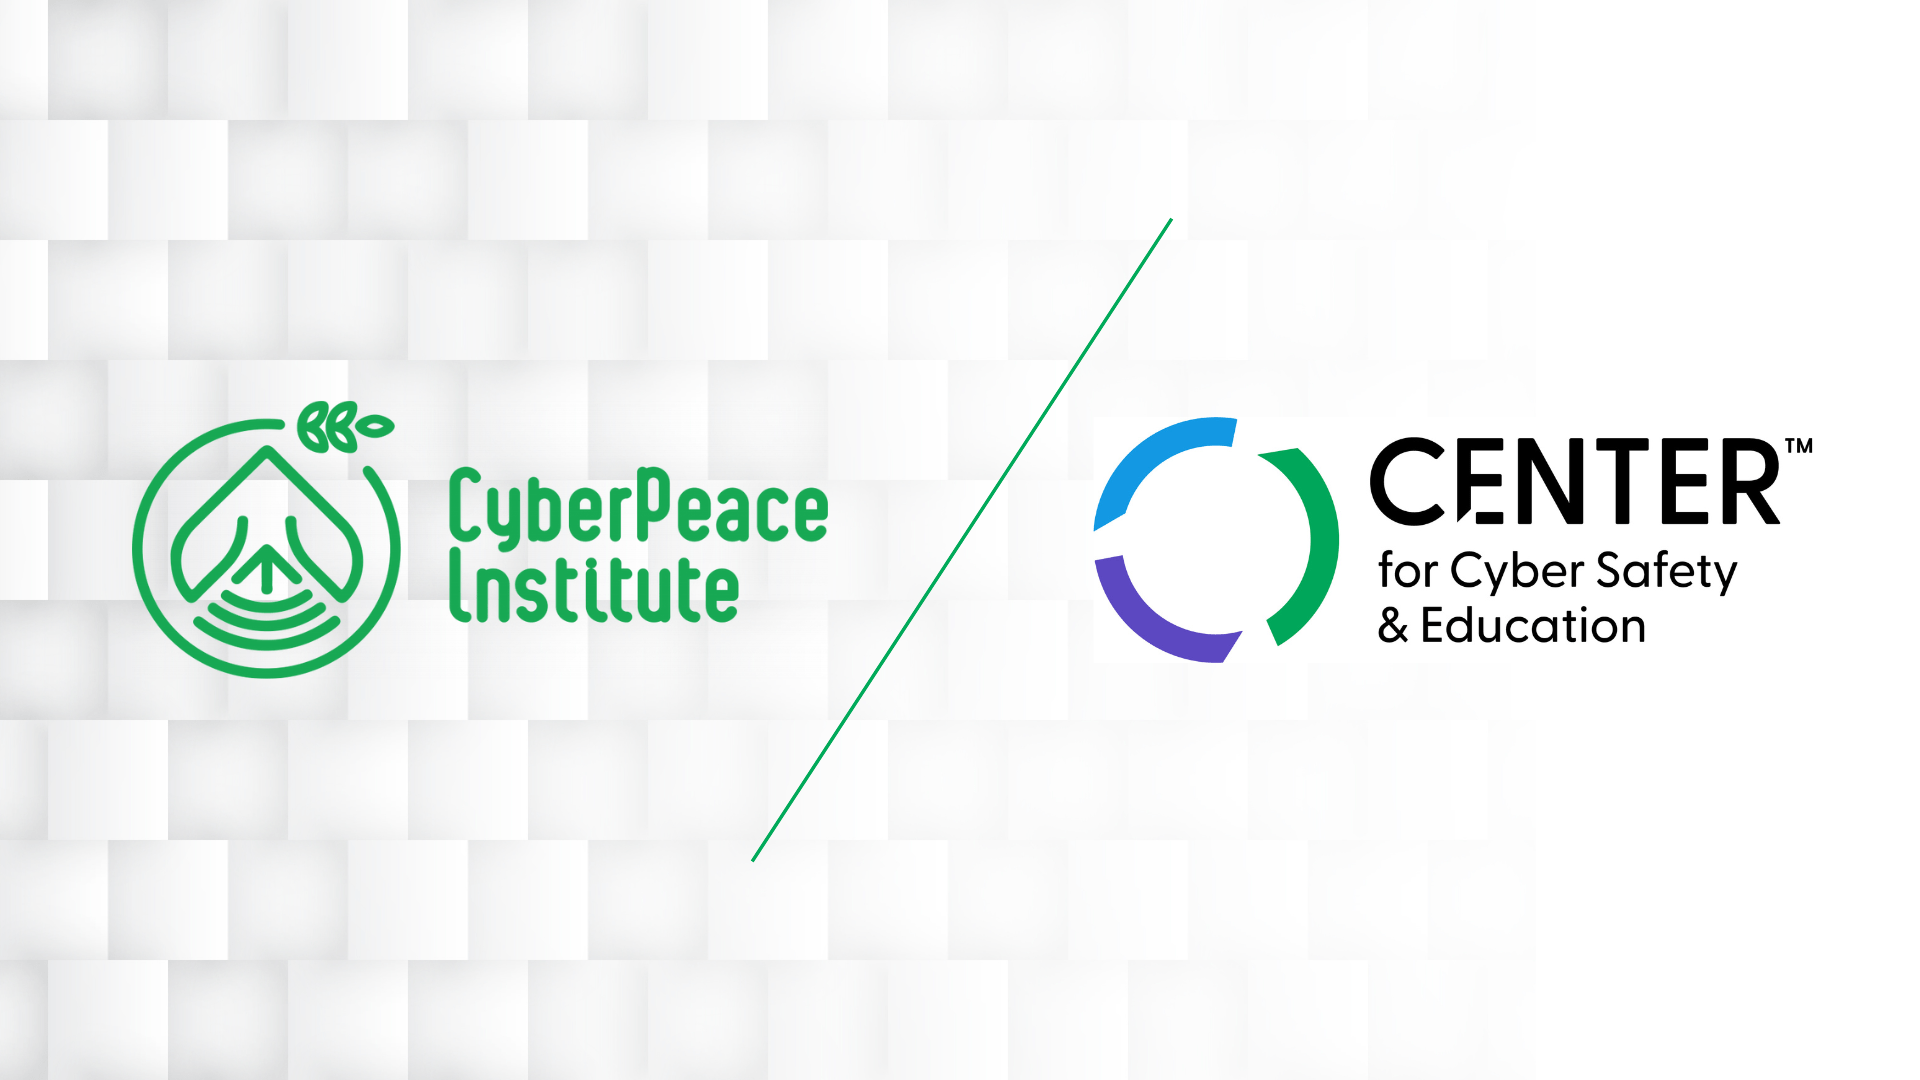 CyberPeace Institute Forges Collaboration with The Center for Cyber Safety & Education to Strengthen Digital Resilience and Security